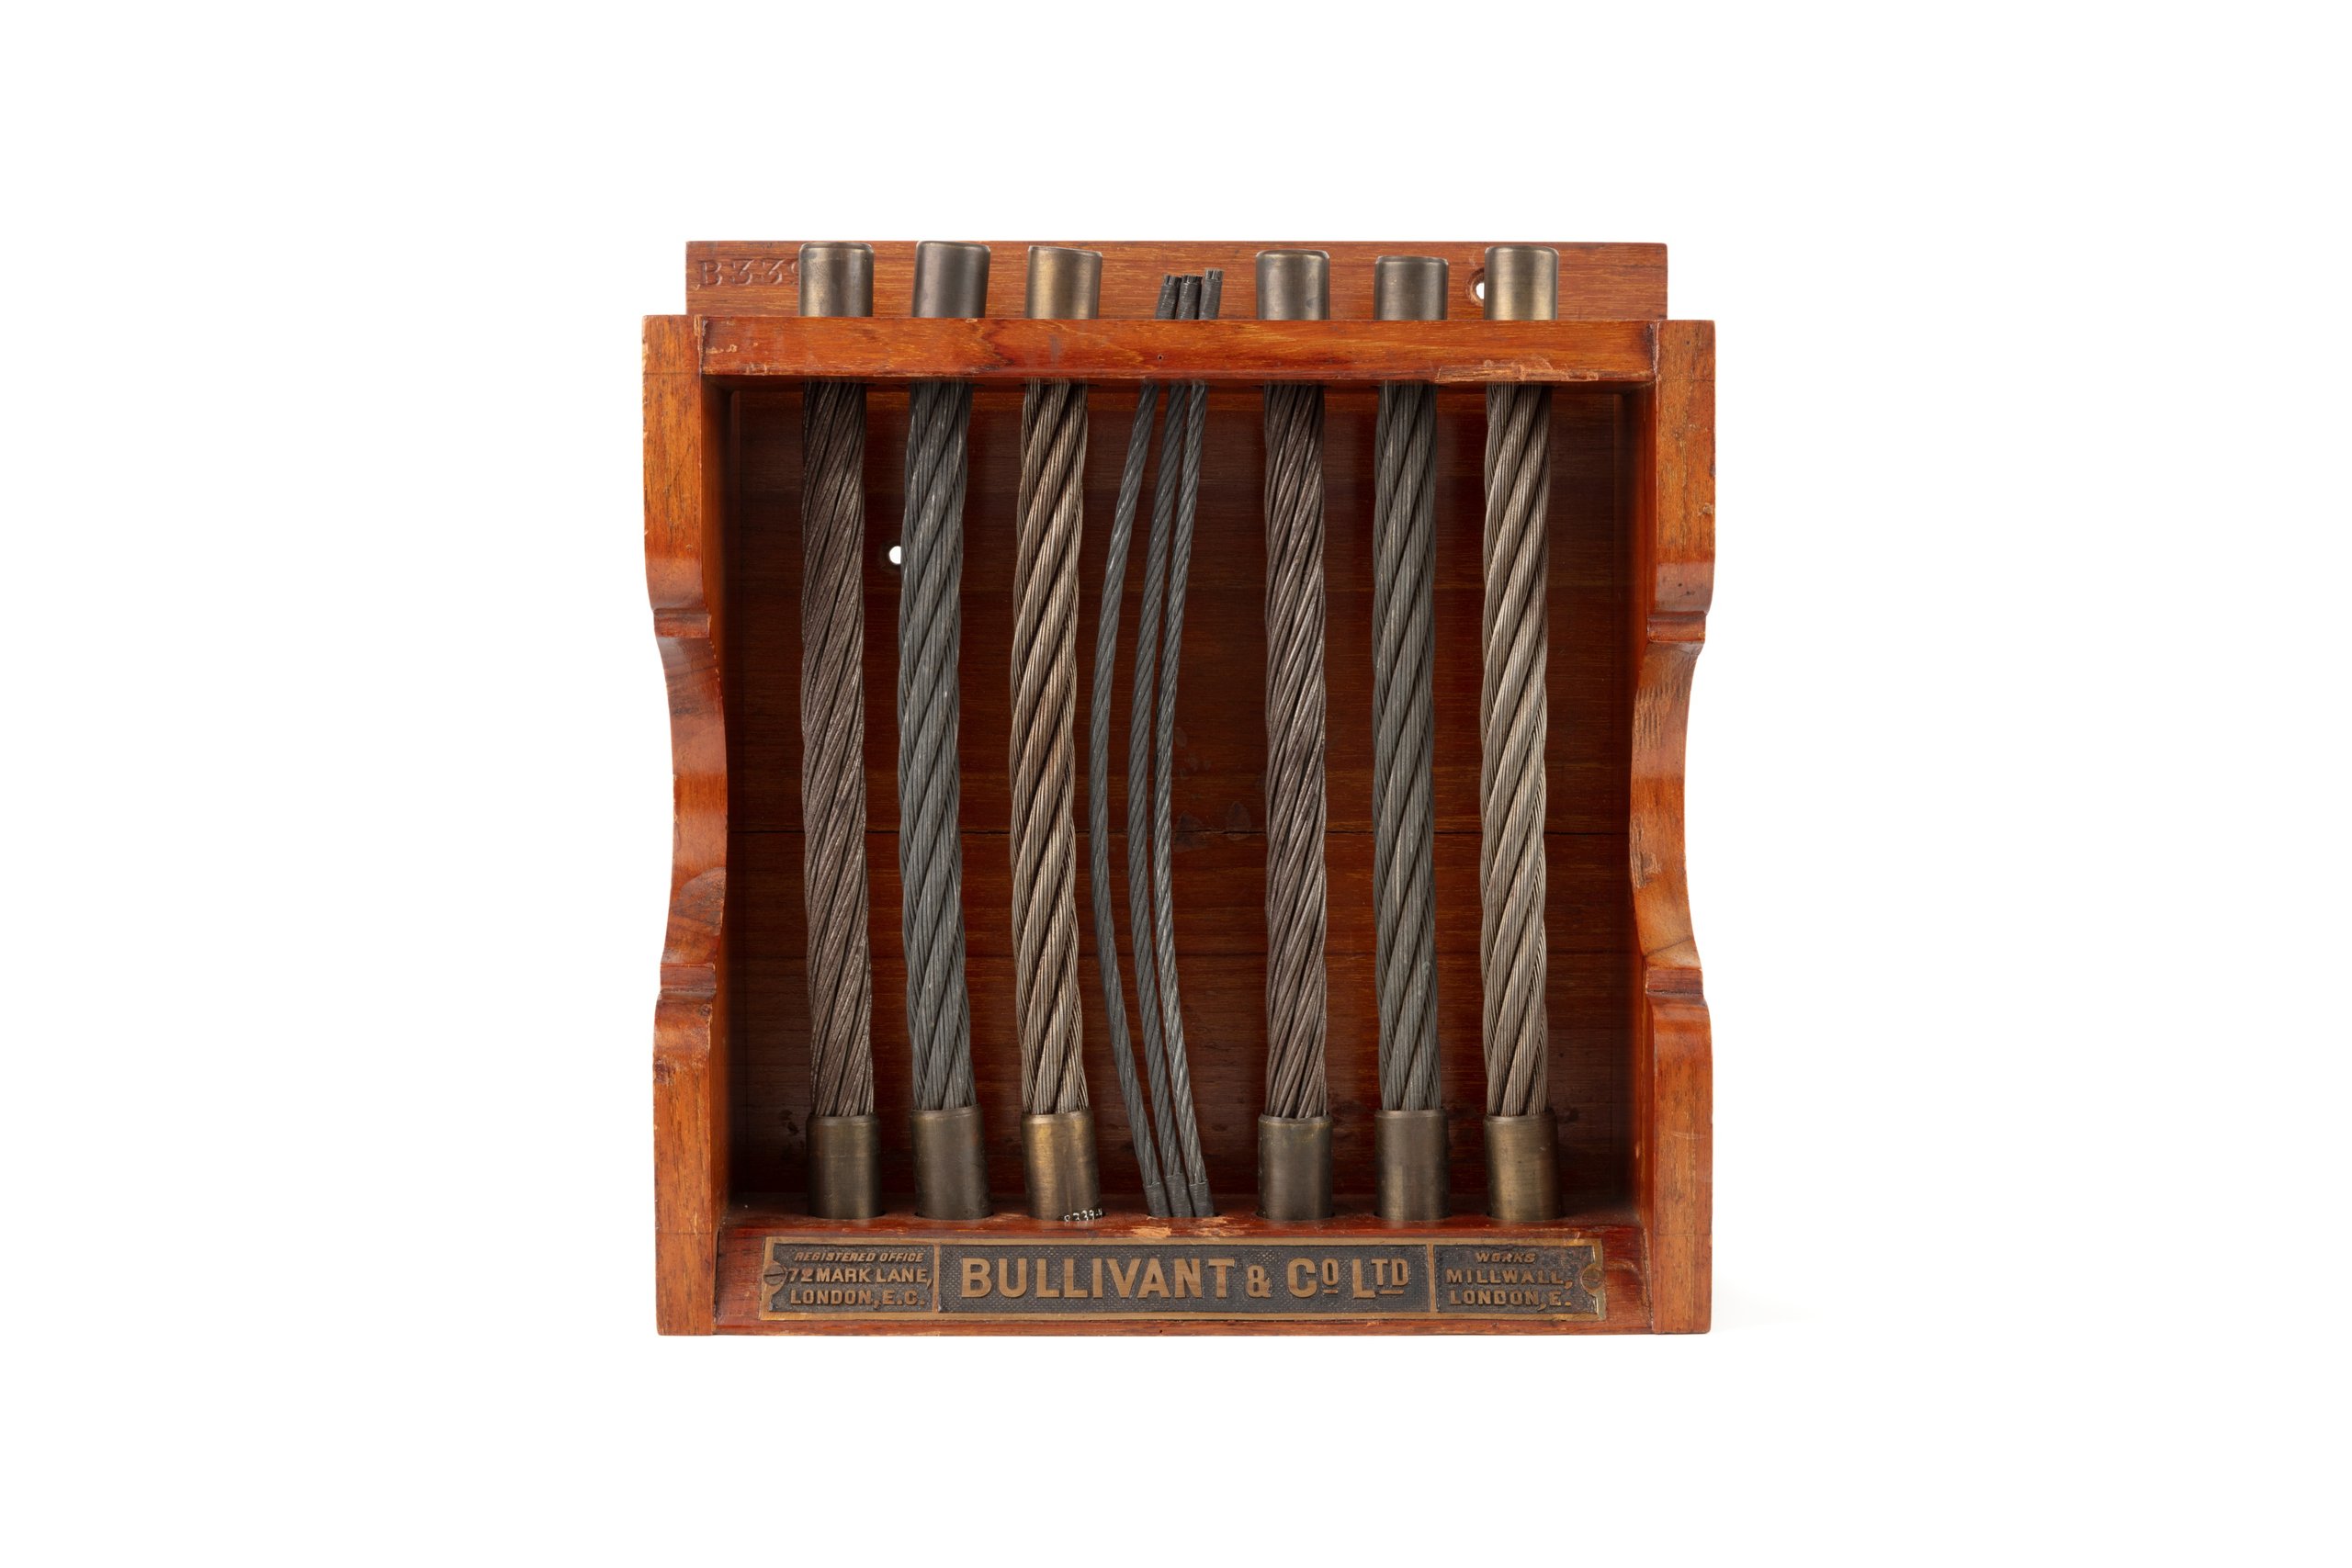 Samples of metal cables by Bullivant & Co